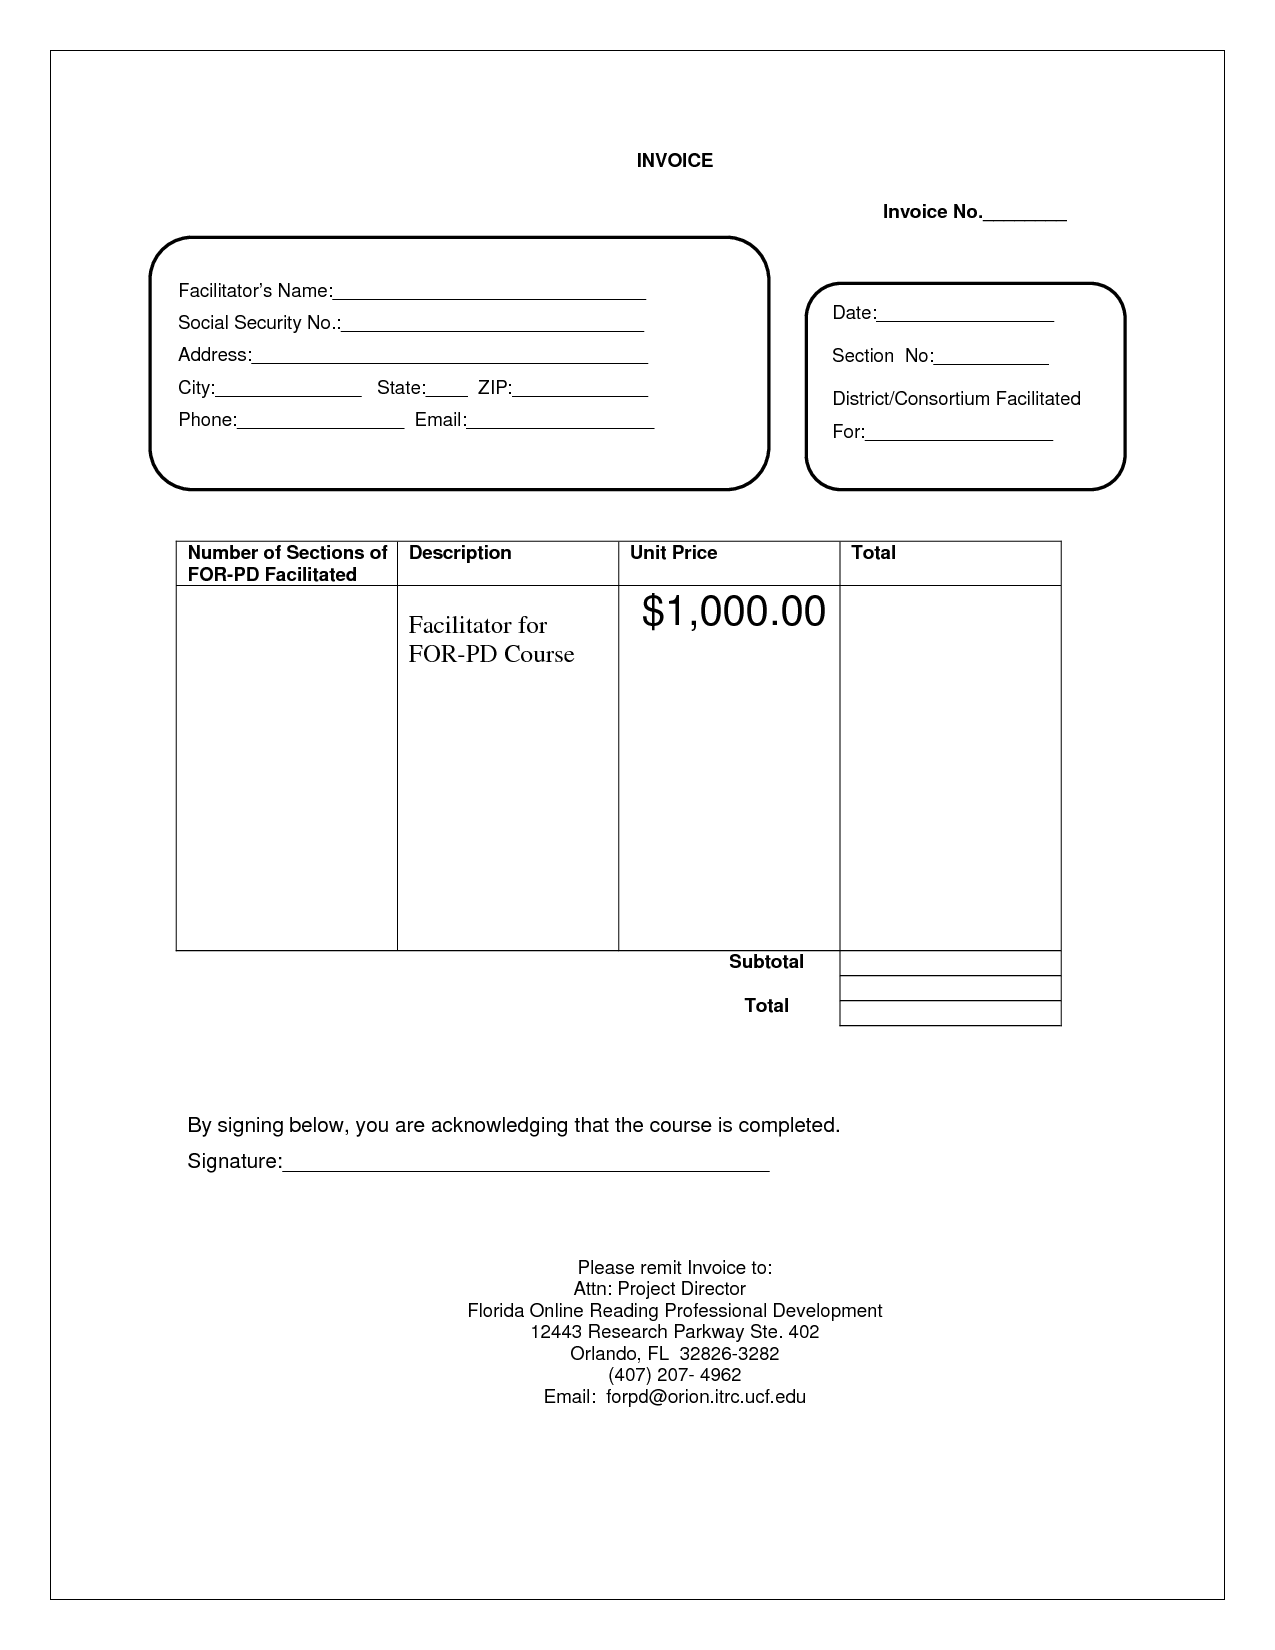 ms-word-invoice-template-free-download-invoice-template-ideas